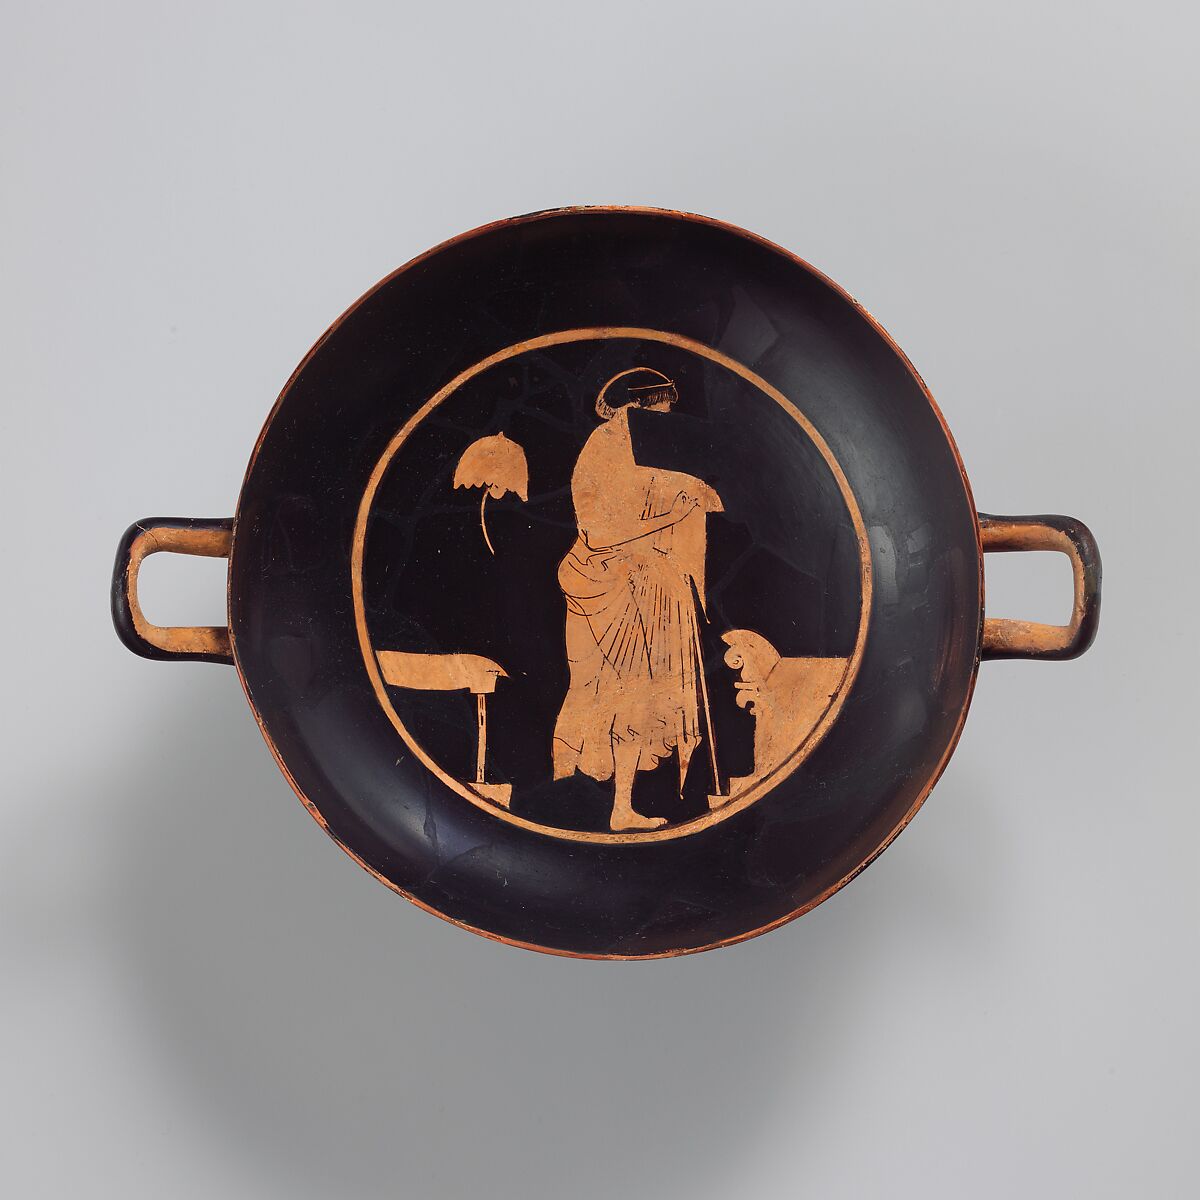 Terracotta kylix (drinking cup), Attributed to Apollodoros, Terracotta, Greek, Attic 